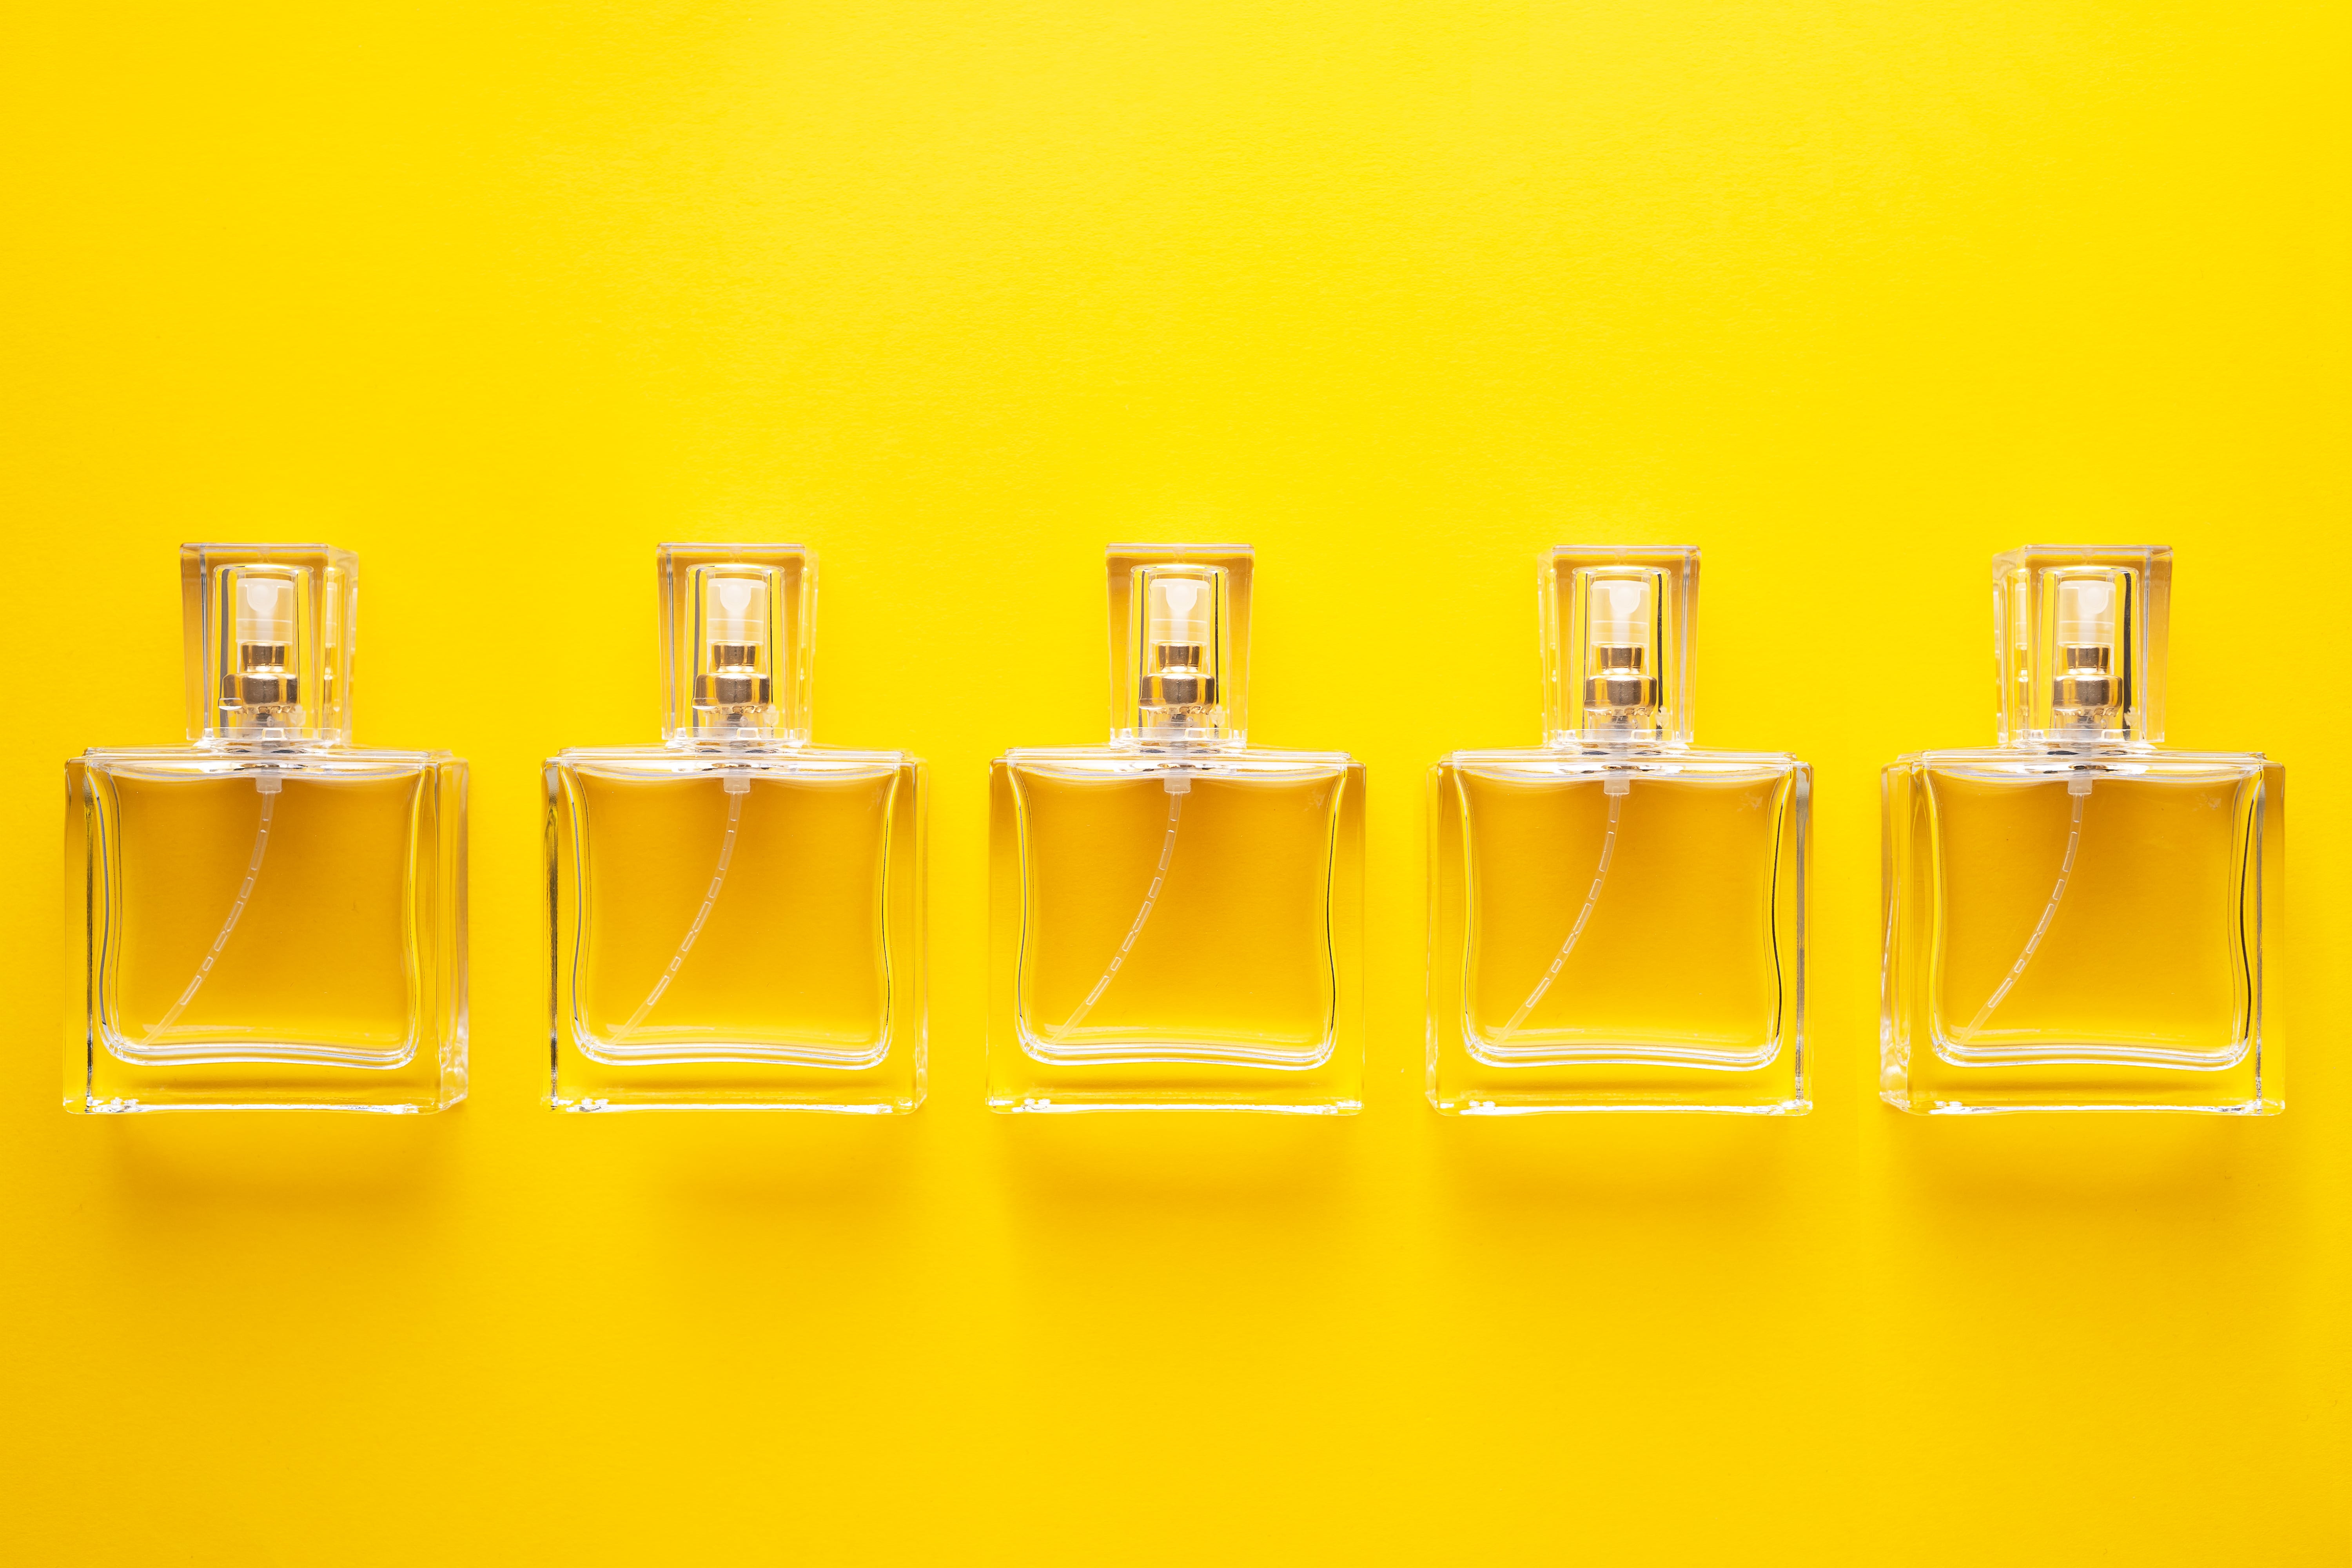 The Psychology Of Wearing Perfume At Home In Quarantine